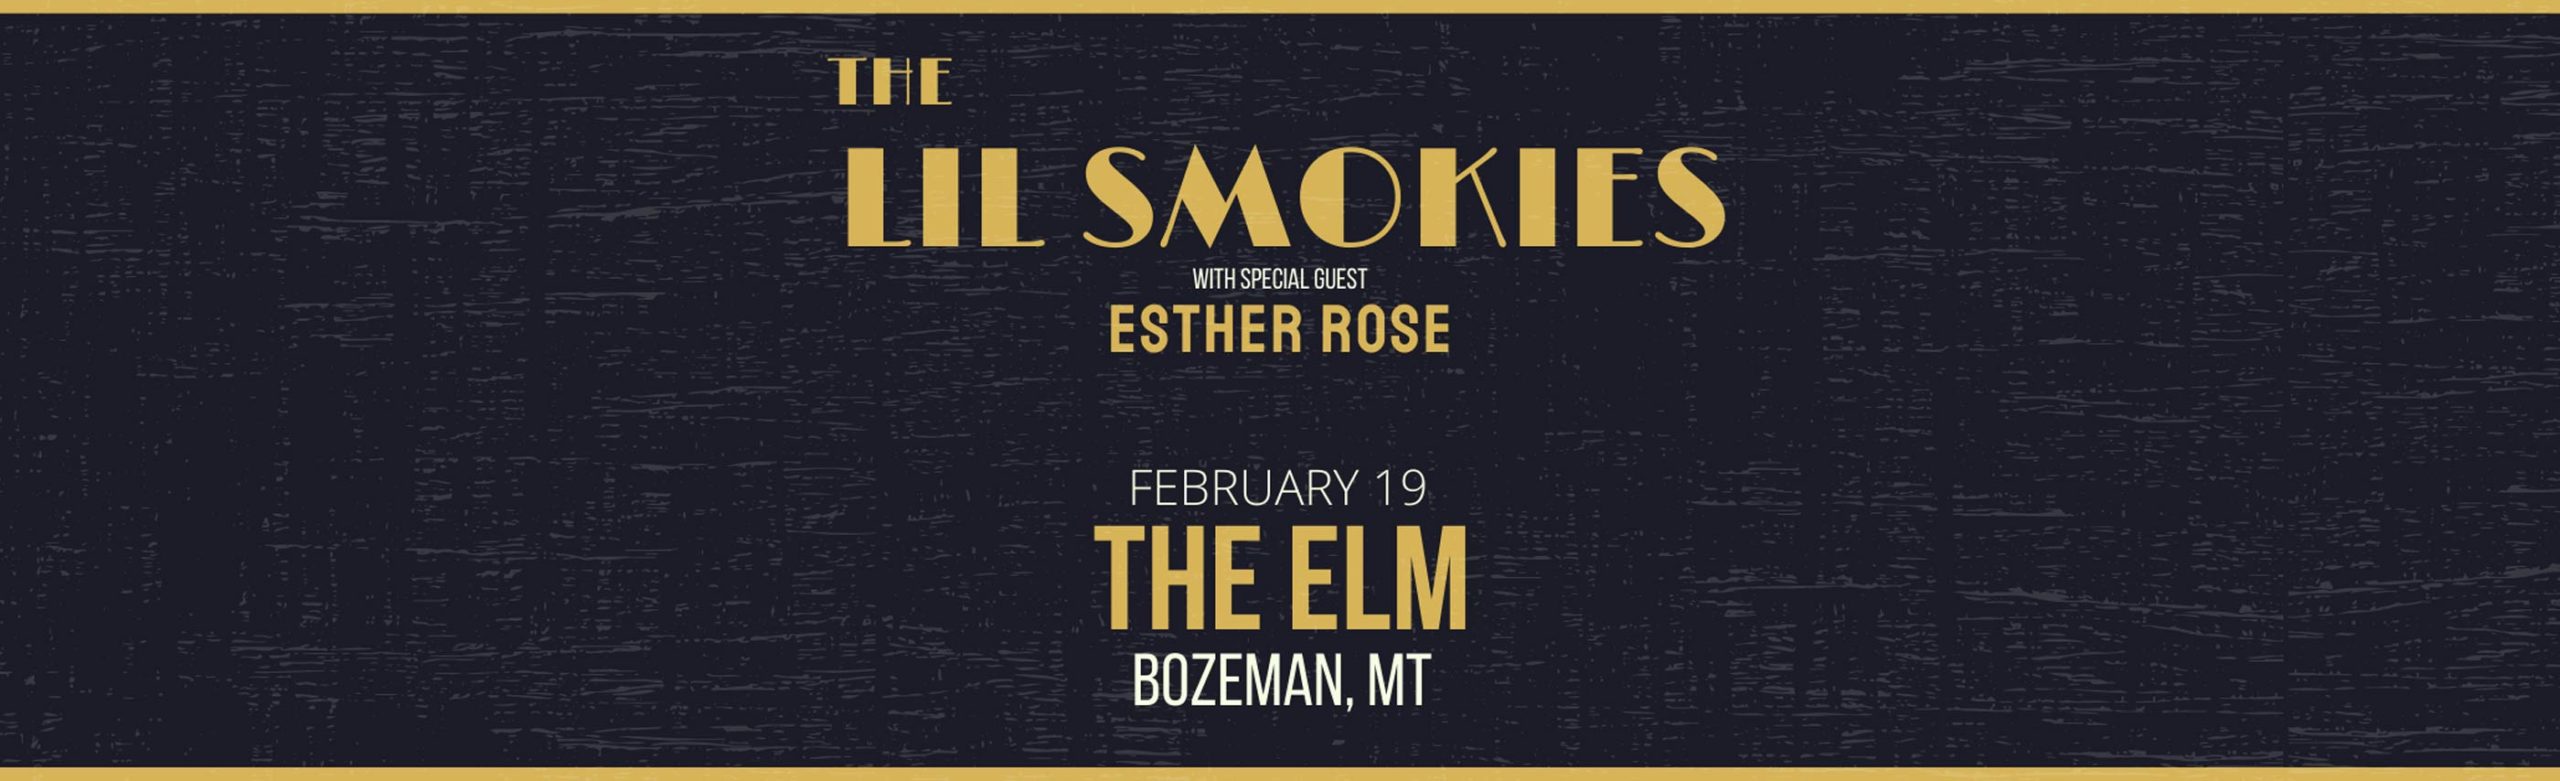 The Lil Smokies Tickets + Signed Vinyl Giveaway Image